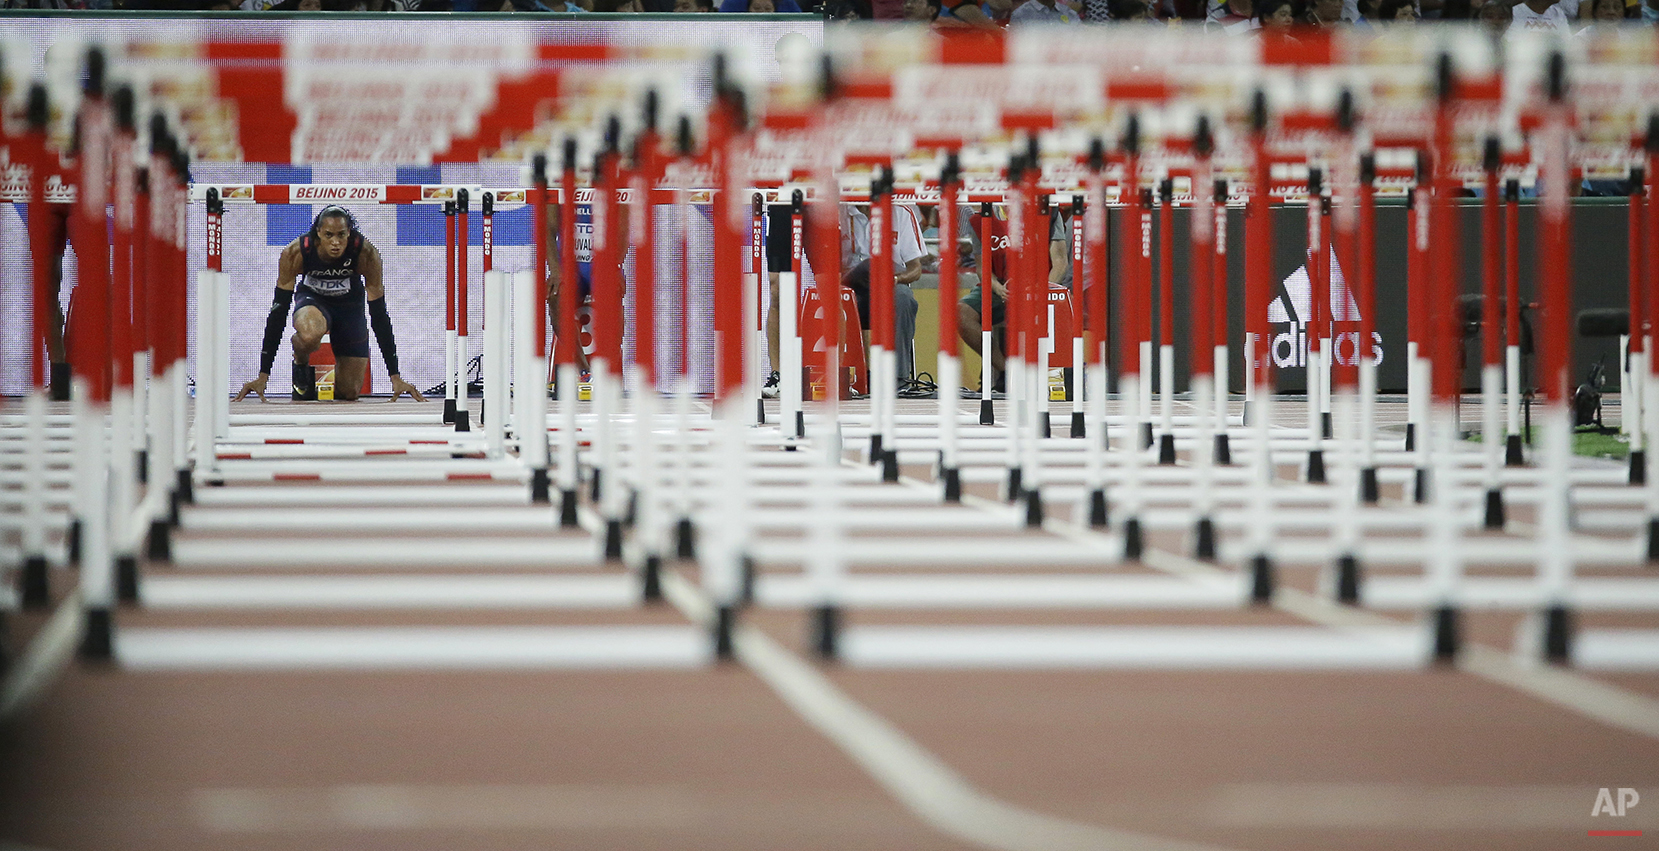  France's Pascal Martinot-Lagarde waits to run in a men’s 110m hurdles semifinal at the World Athletics Championships at the Bird's Nest stadium in Beijing, Thursday, Aug. 27, 2015. (AP Photo/David J. Phillip) 